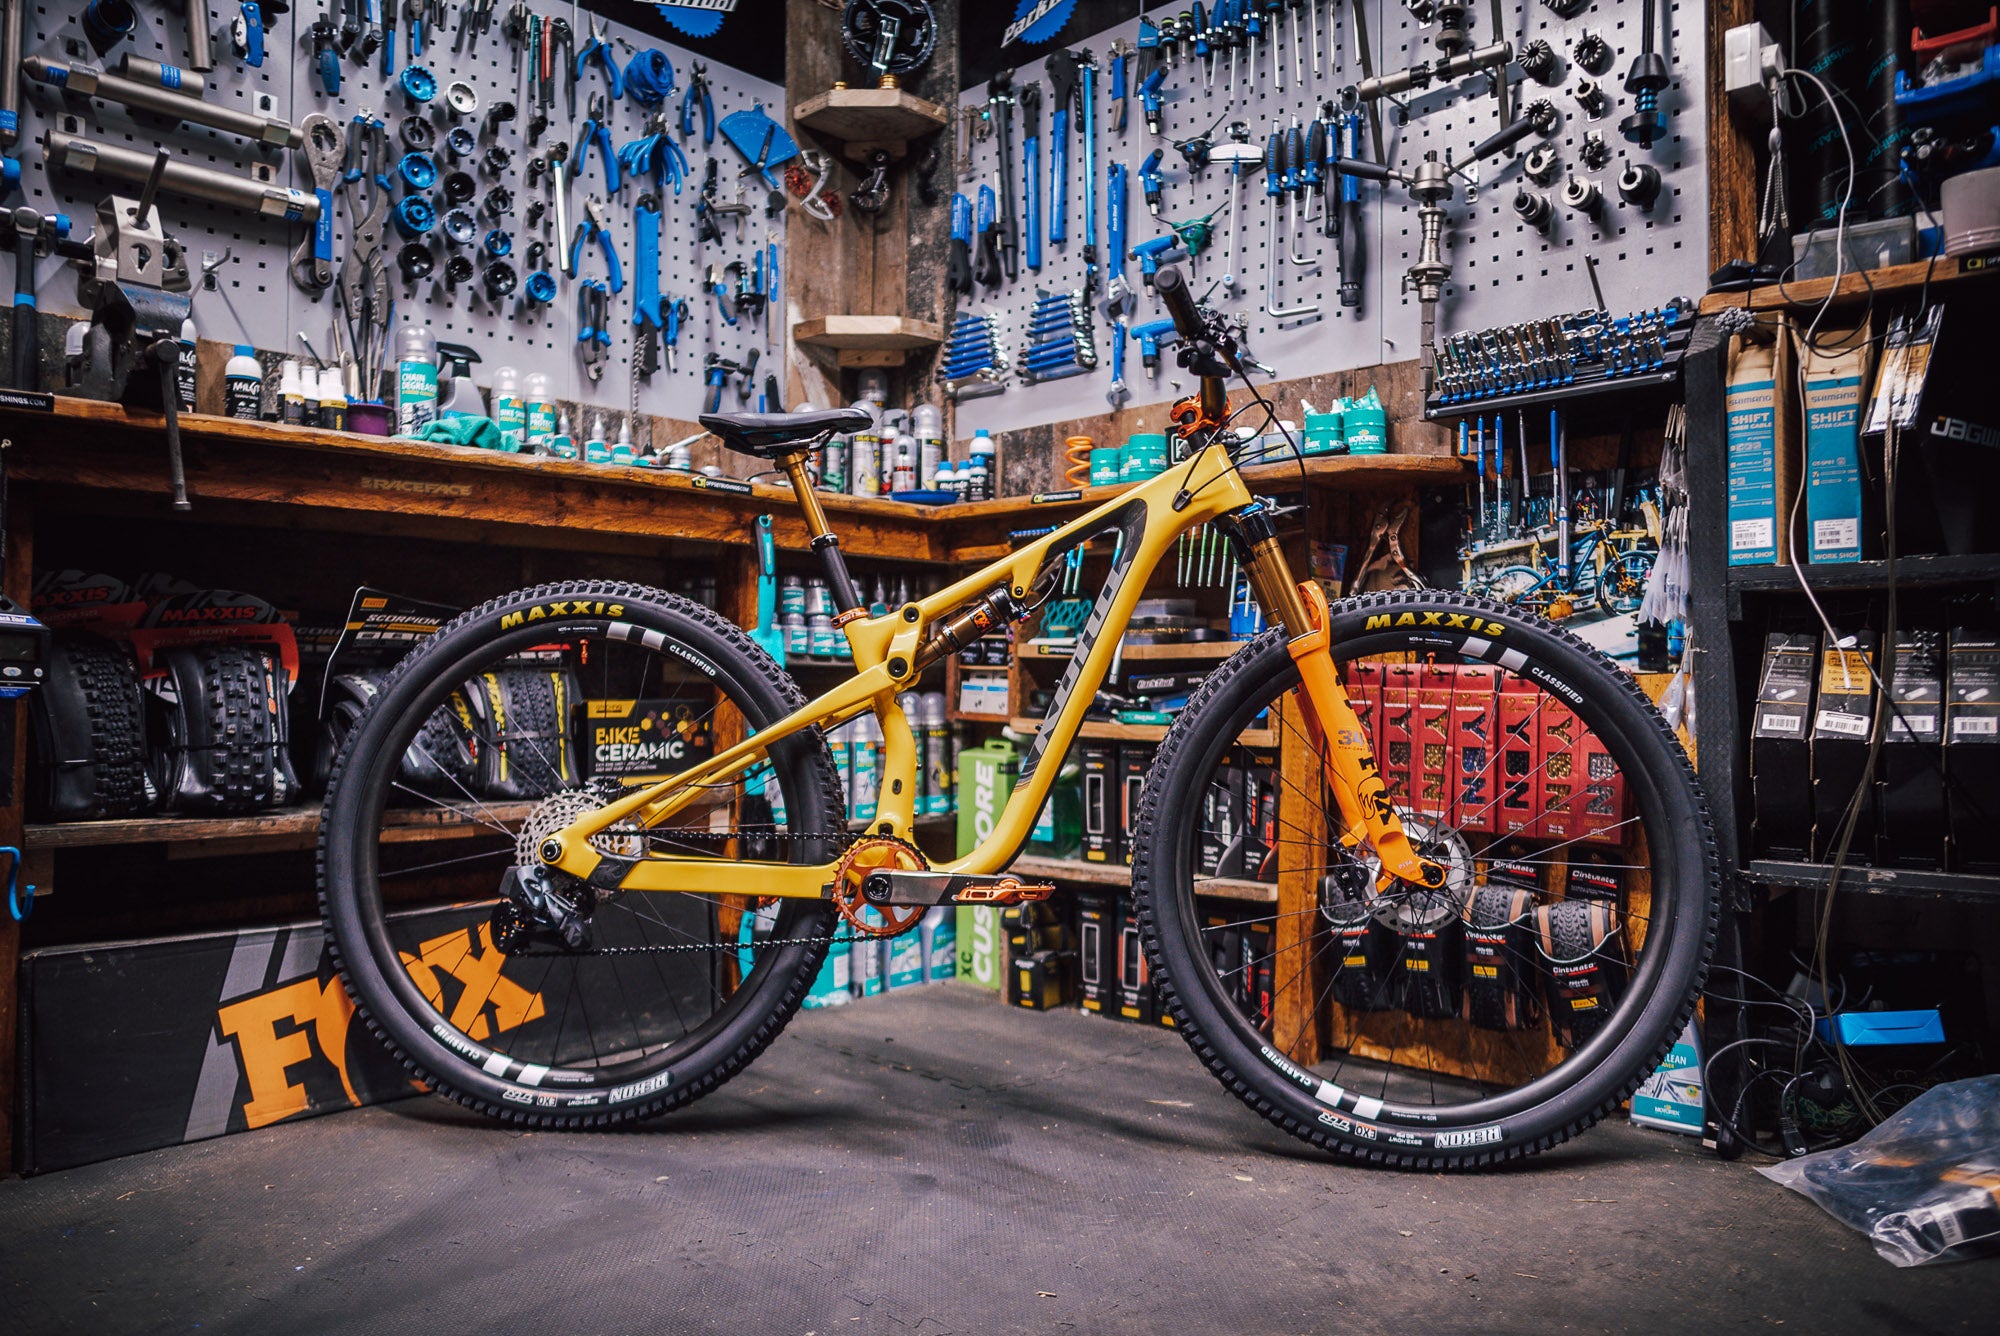 Kona Dream Builds: Gee Milner Builds a Hei Hei CR DL from the Future